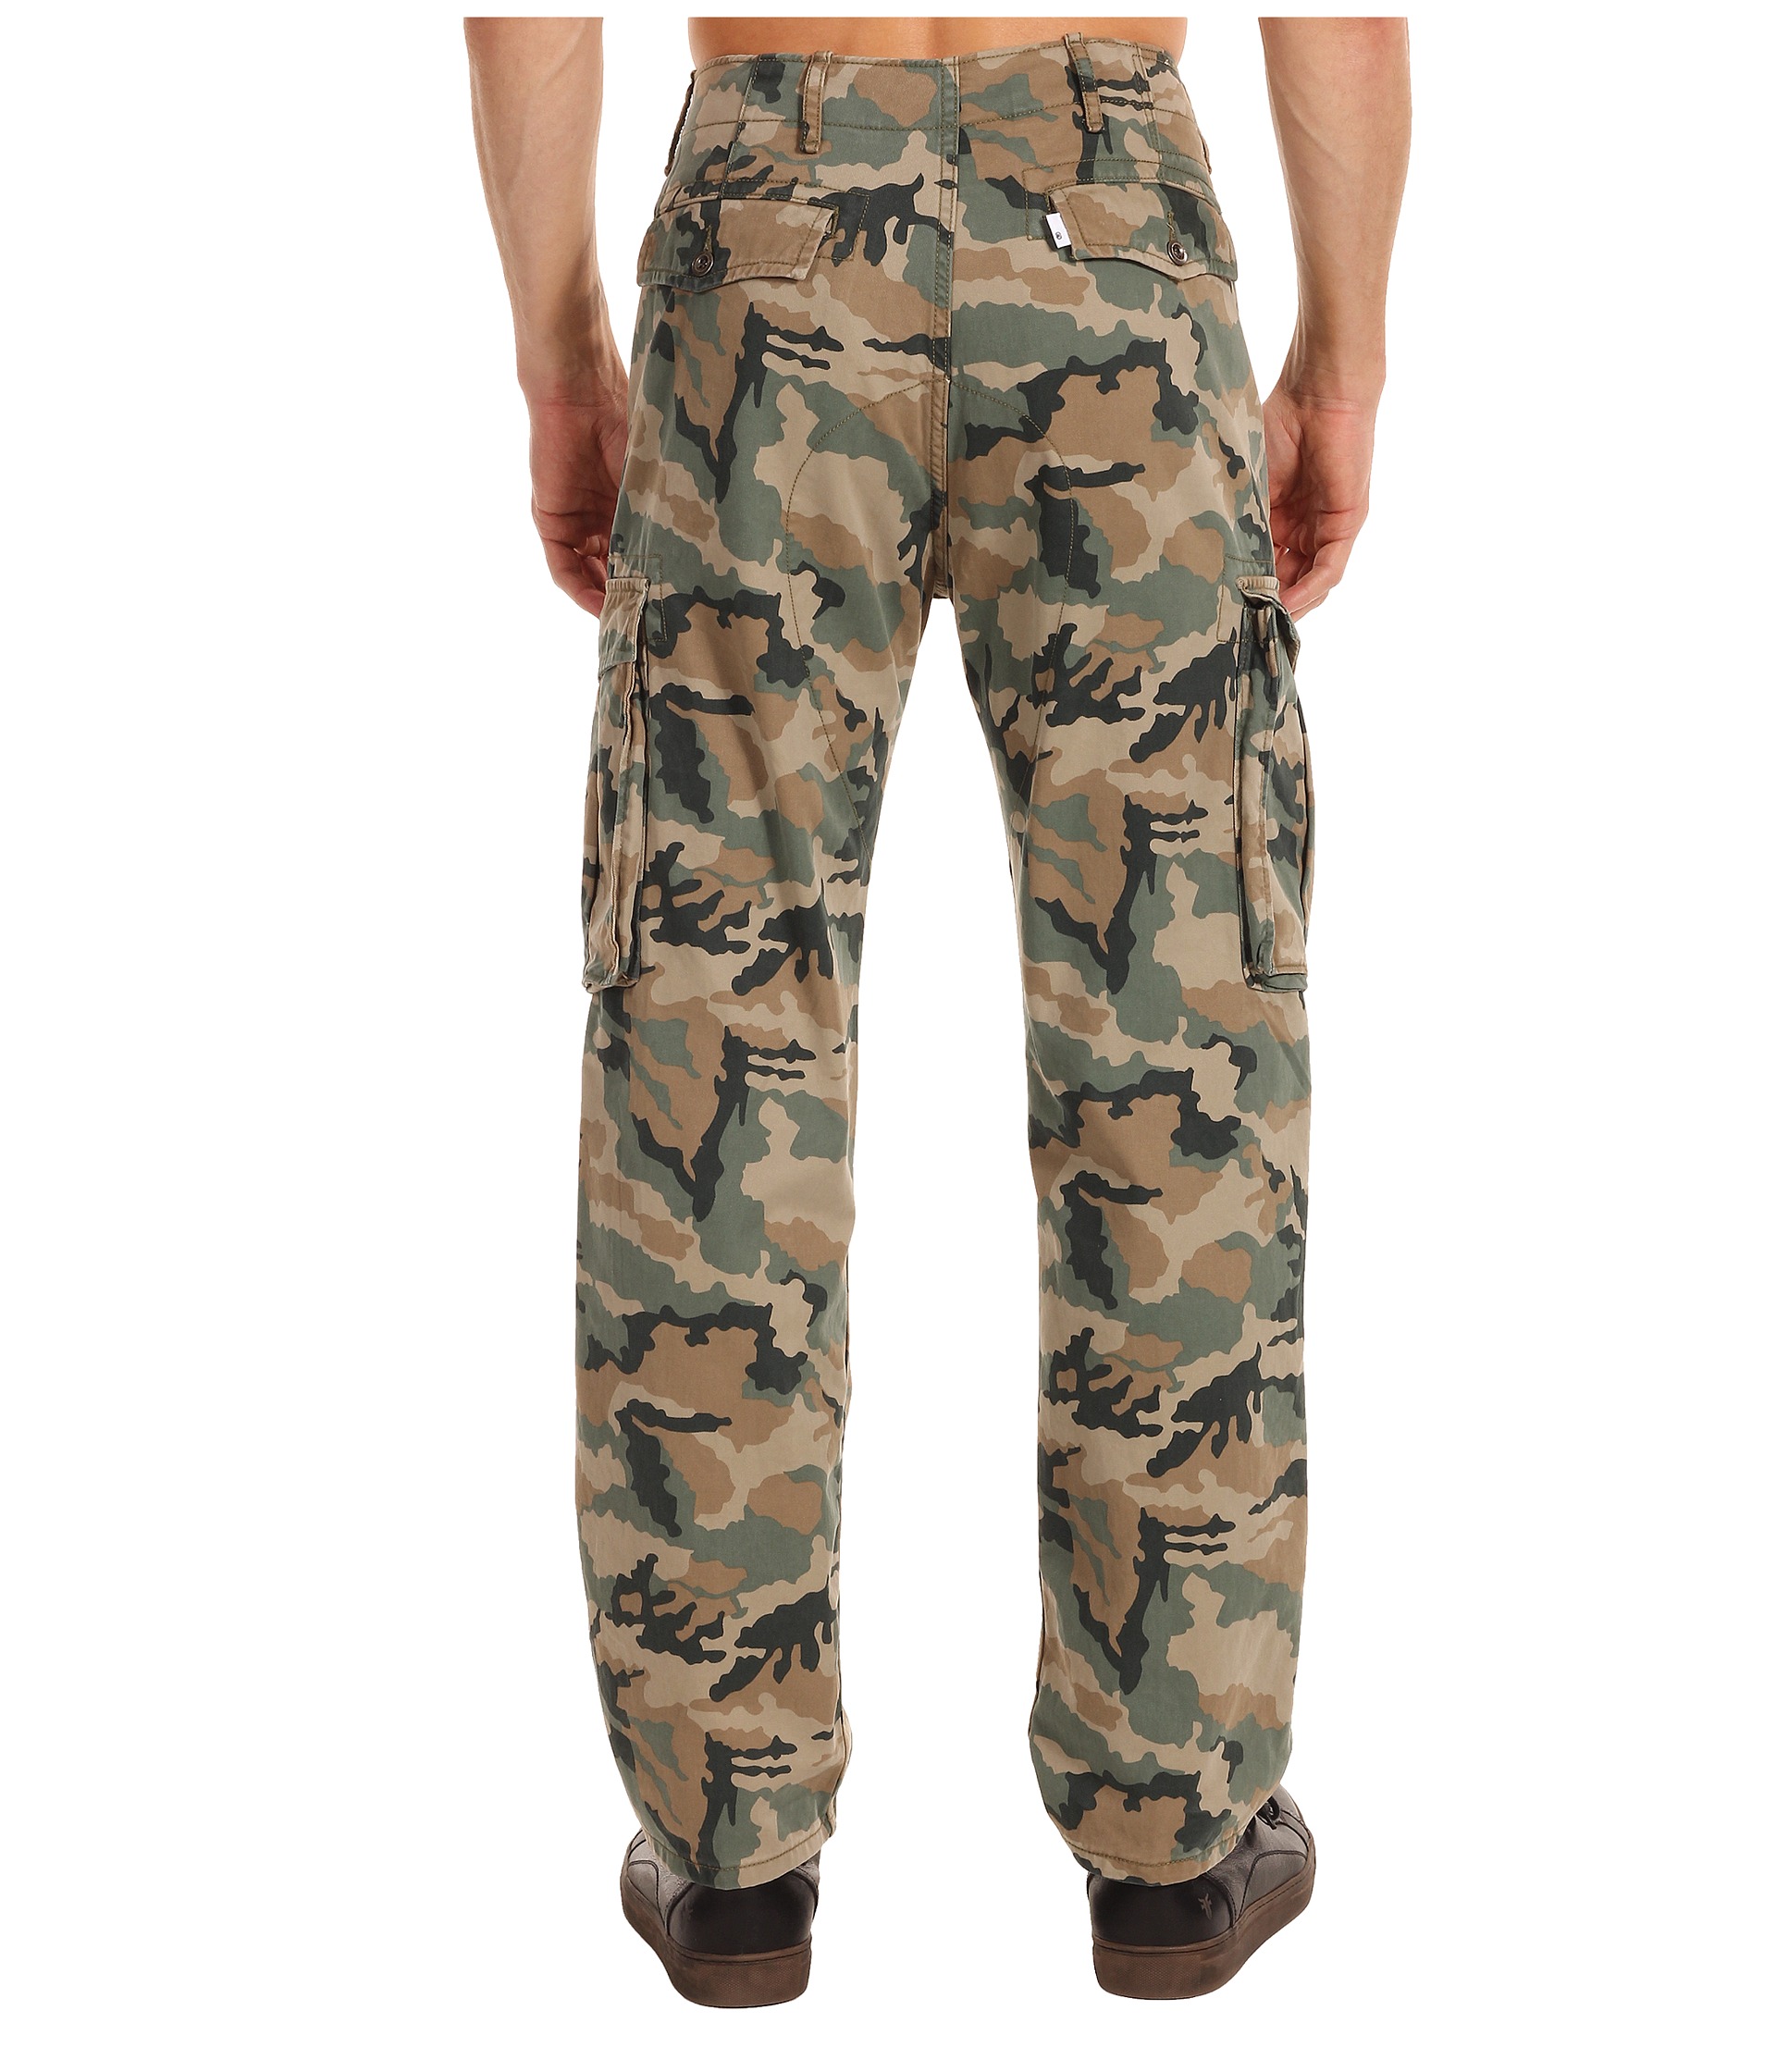 Levis Mens Ace Cargo Pant Camo | Shipped Free at Zappos